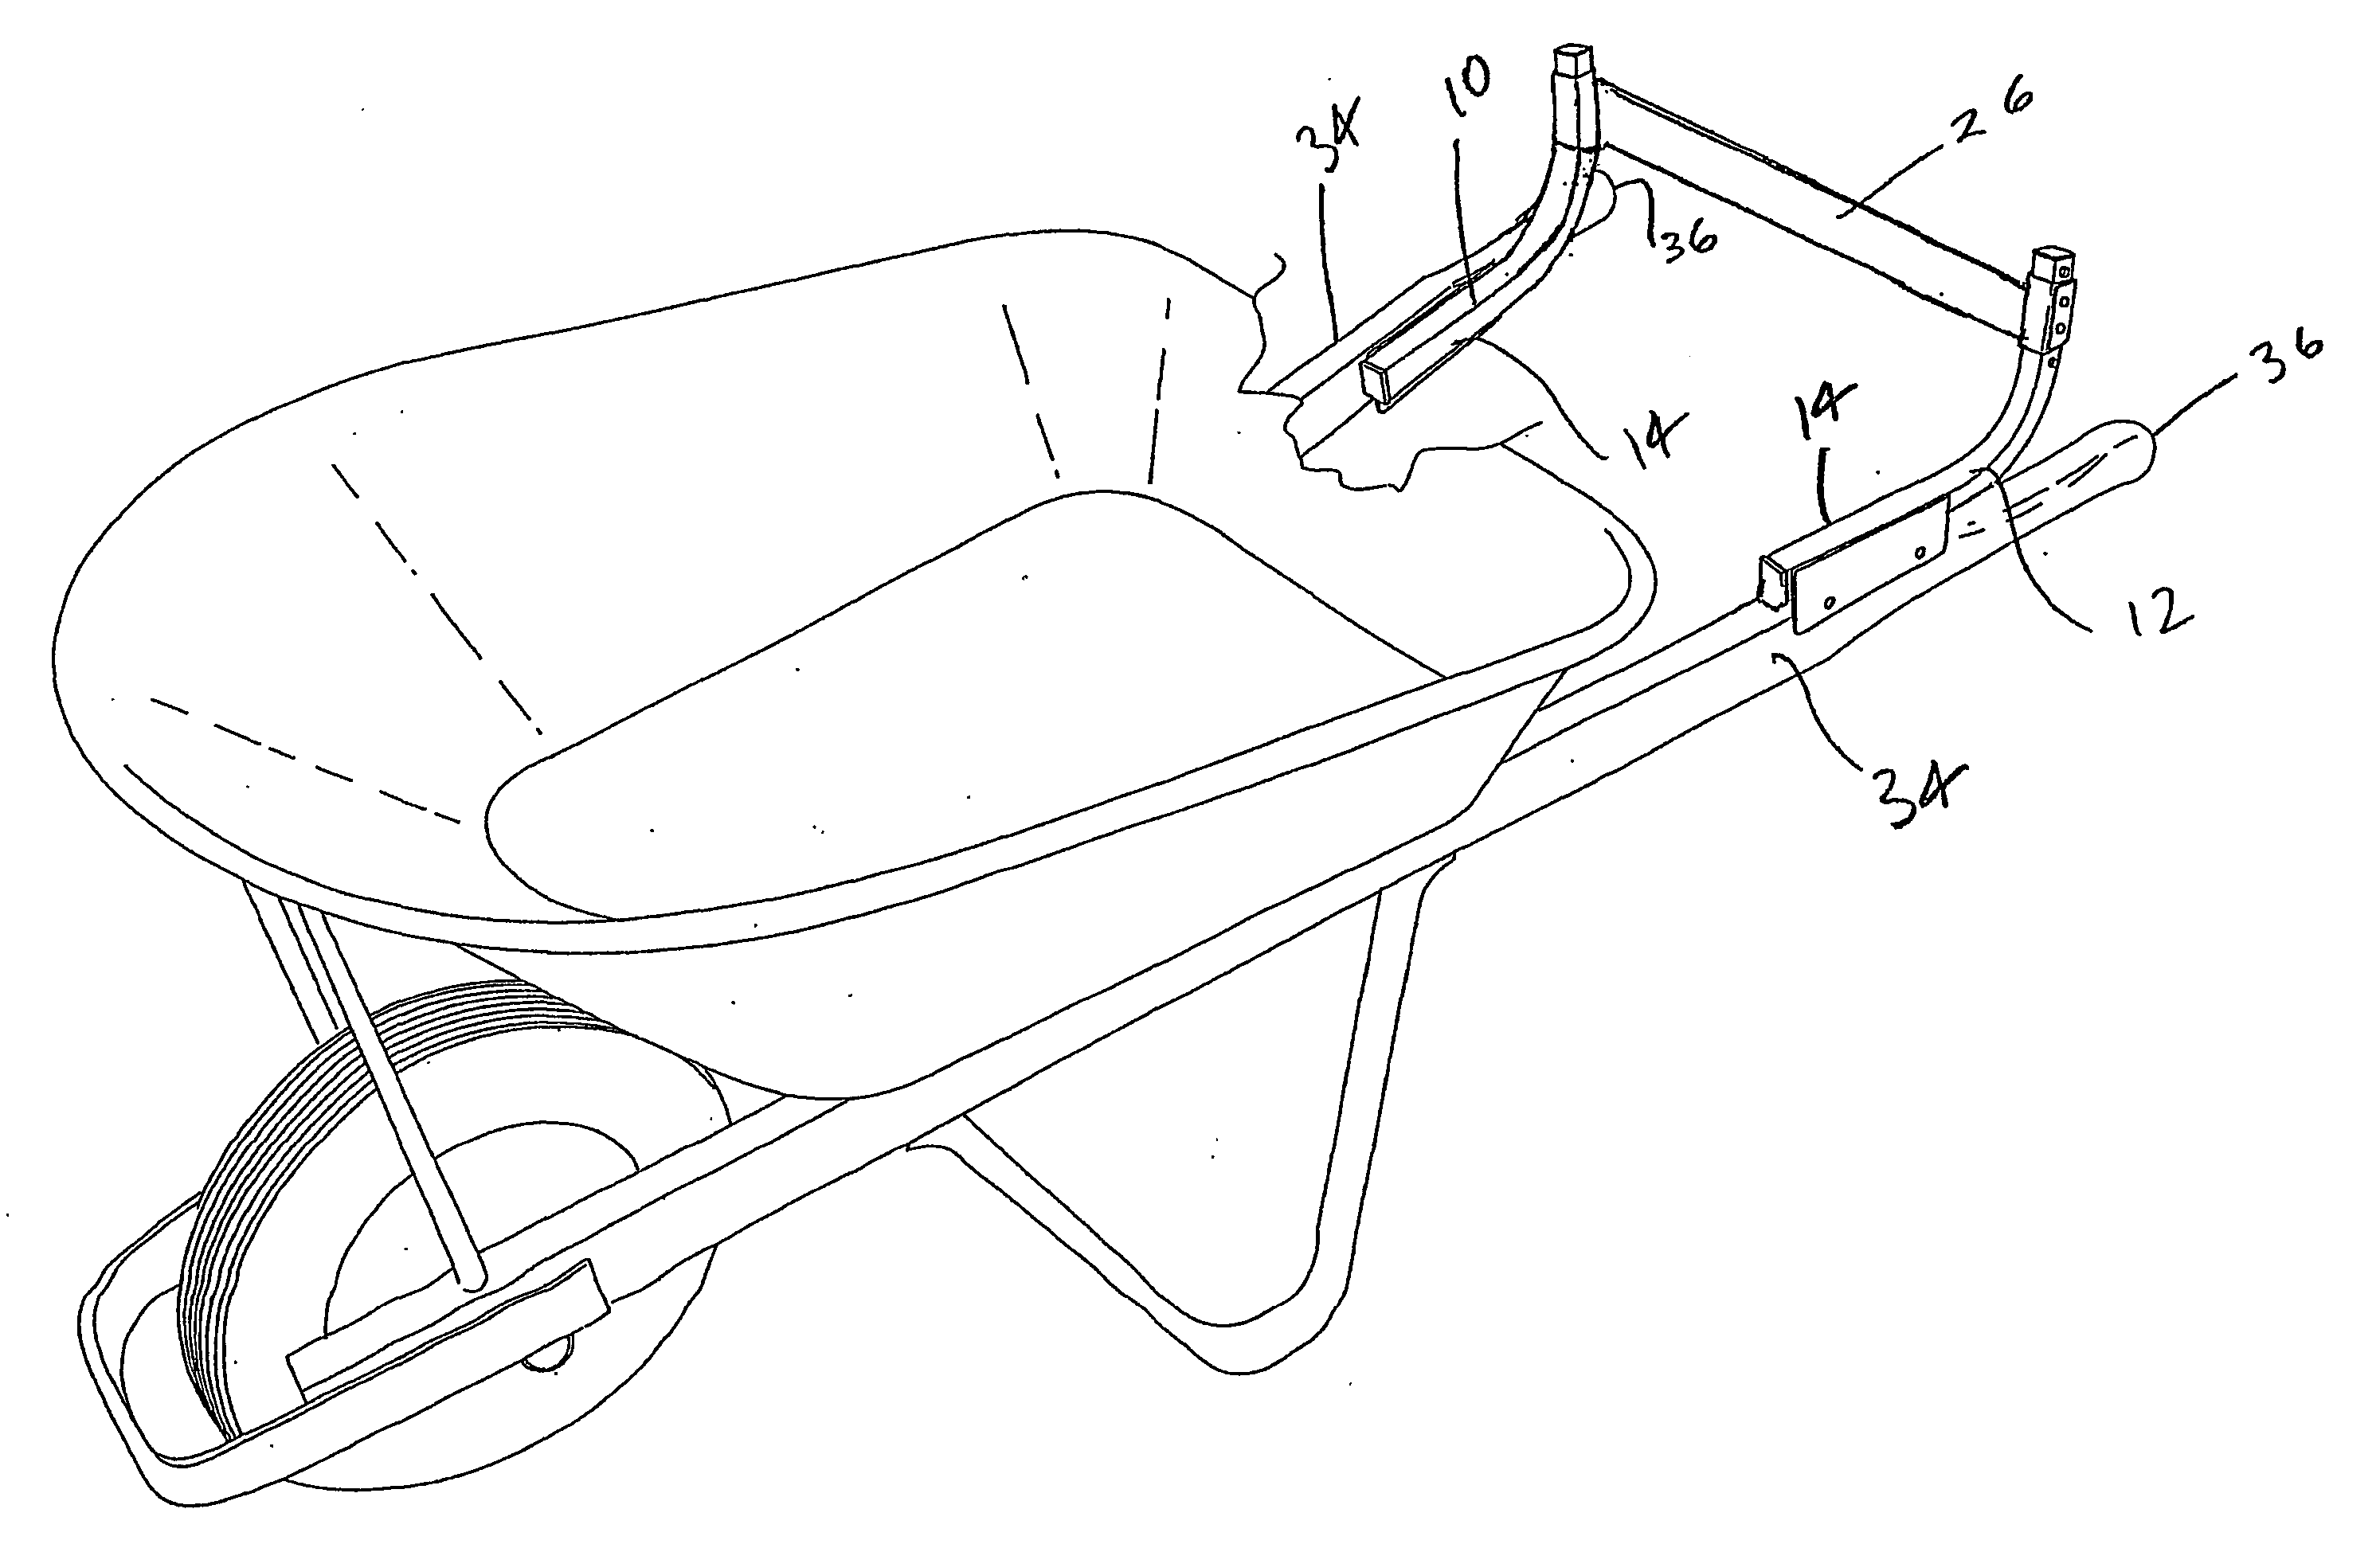 Device to assist propulson of hand-propelled vehicles